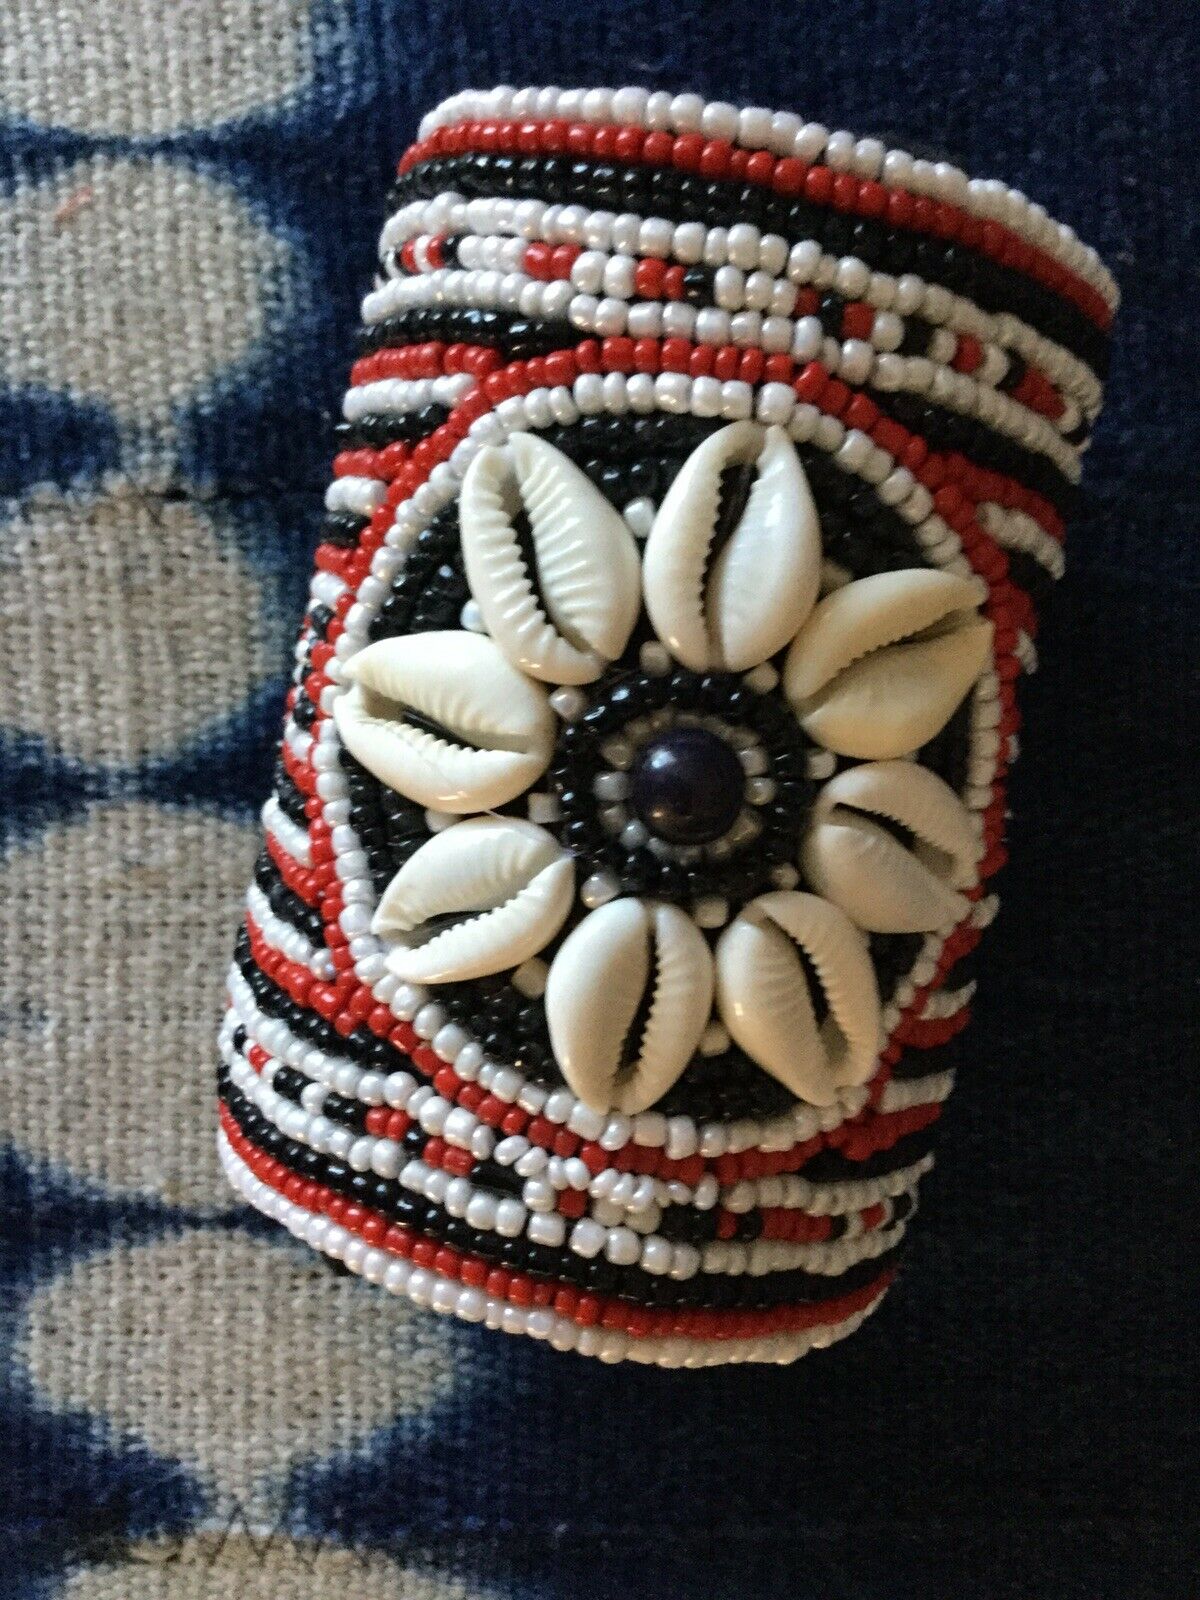 WIDE Tribal beads and Cowrie   CUFF Bracelet ~select From 3 Styles